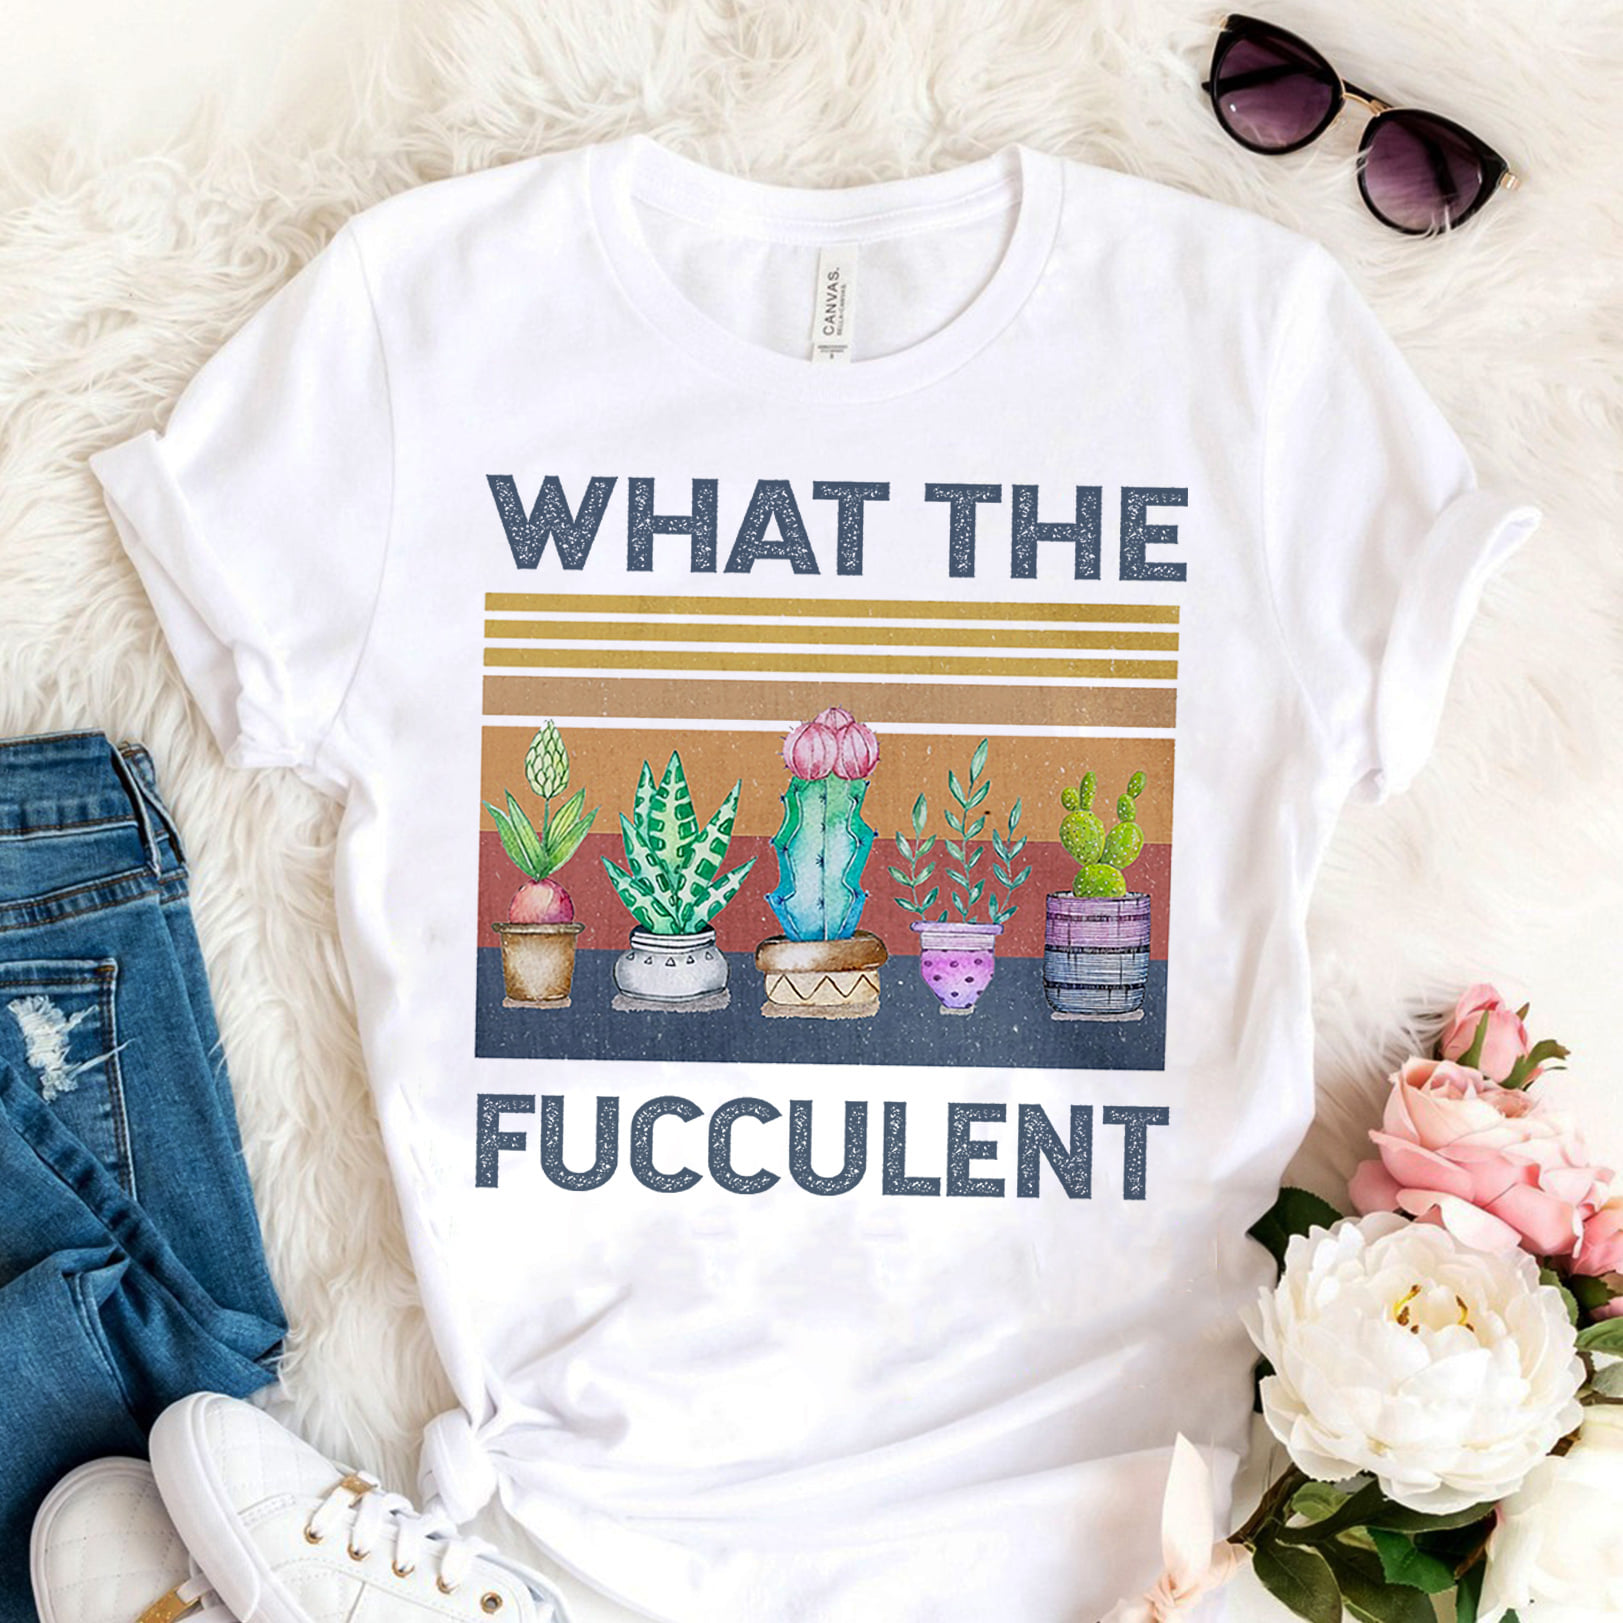 What the fucculent – Vessels of plants